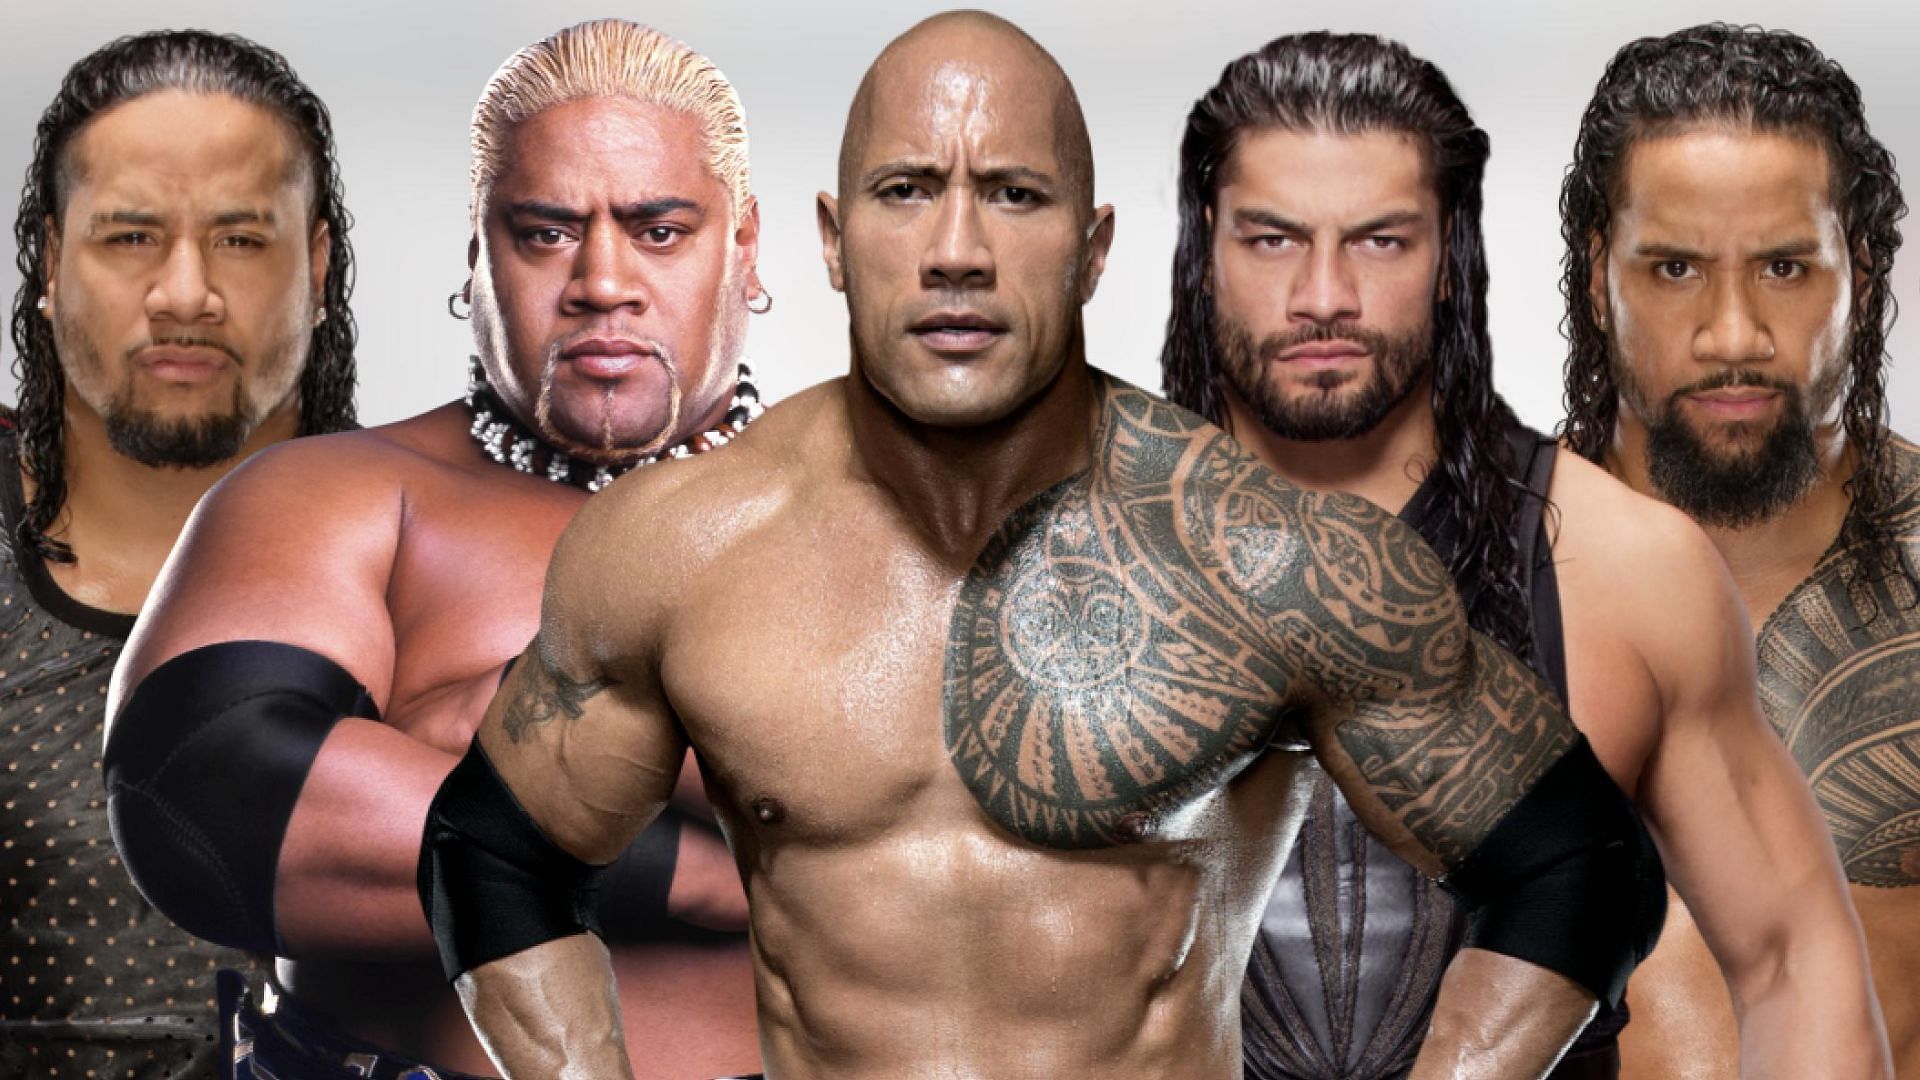 The Rock and Roman Reigns have been rumored to meet at WrestleMania 39.